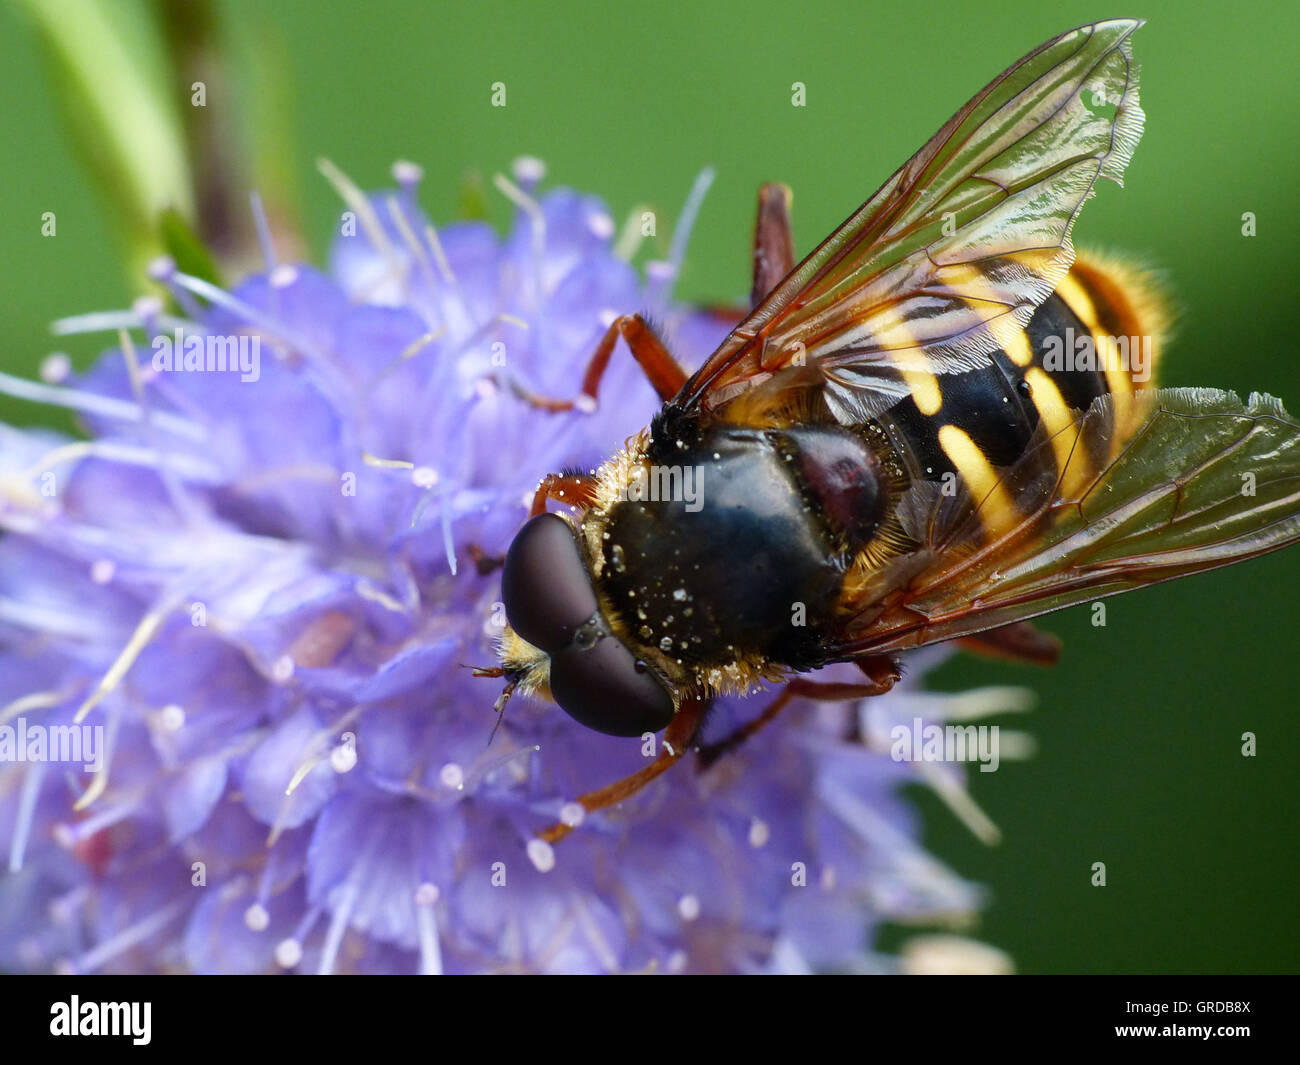 Hoverfly, Syrphidae, Nibbling From Violet Flower Stock Photo